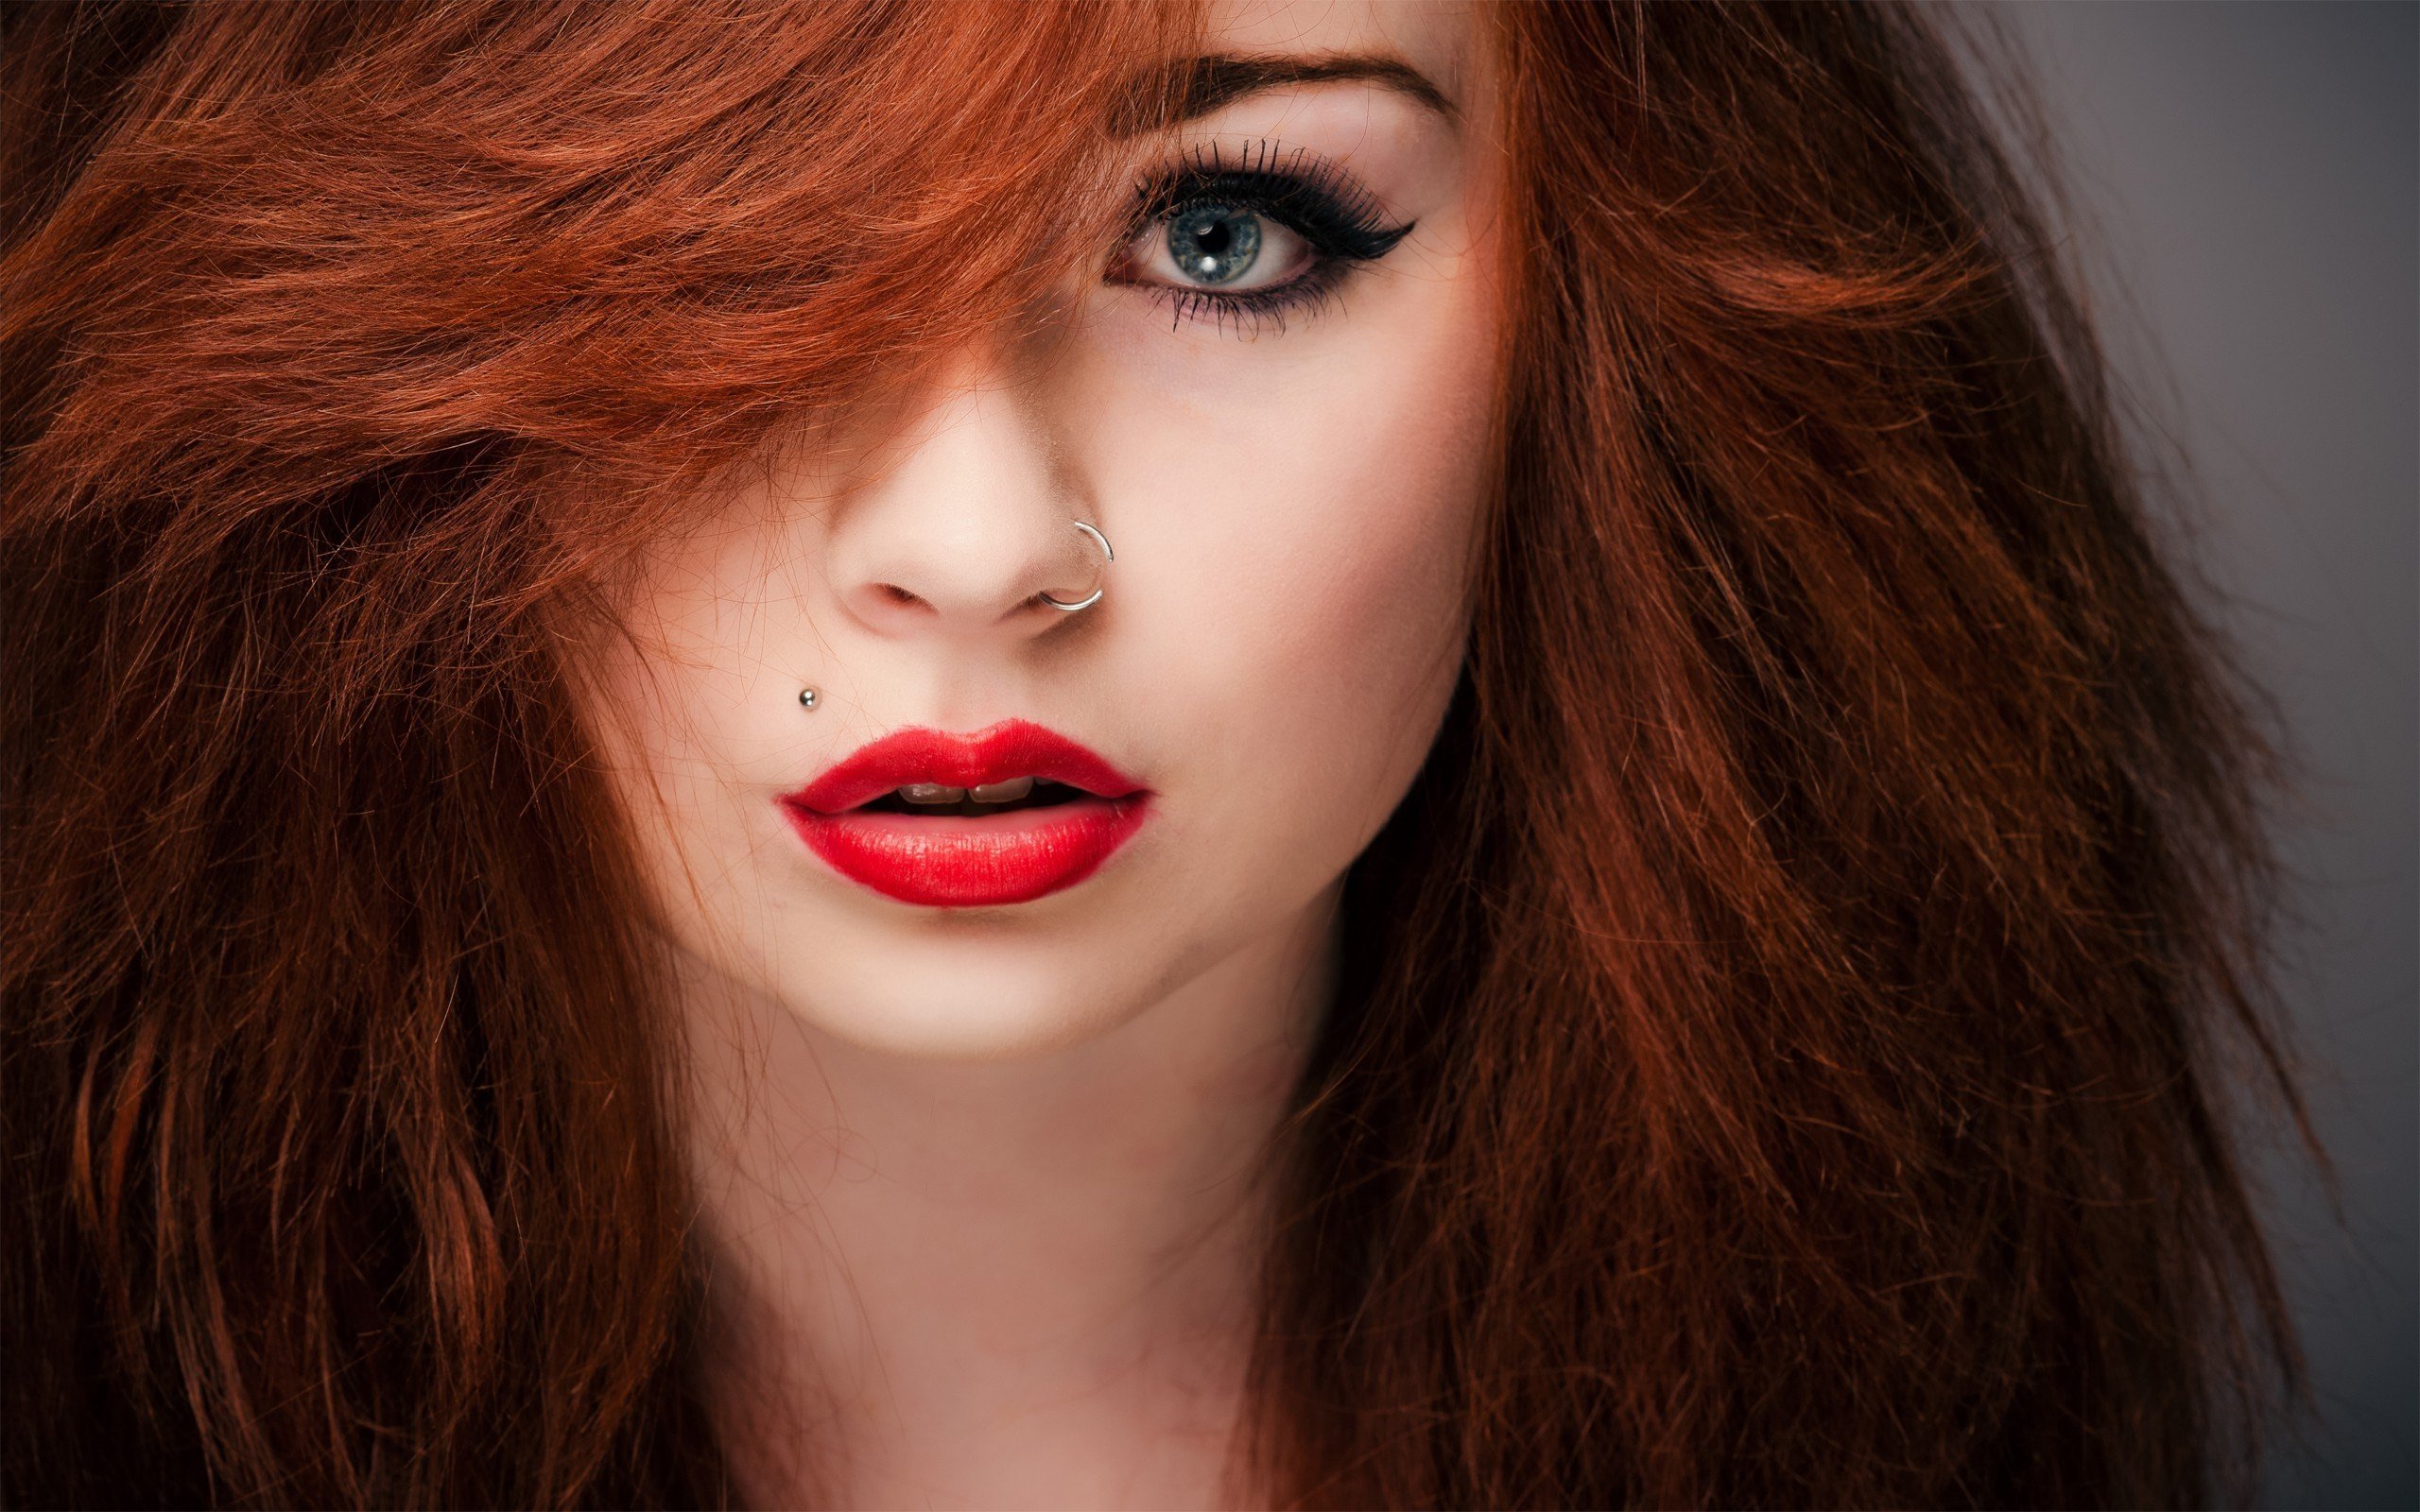 Women Model Redhead Long Hair Face Portrait Blue Eyes Looking At Viewer Open Mouth